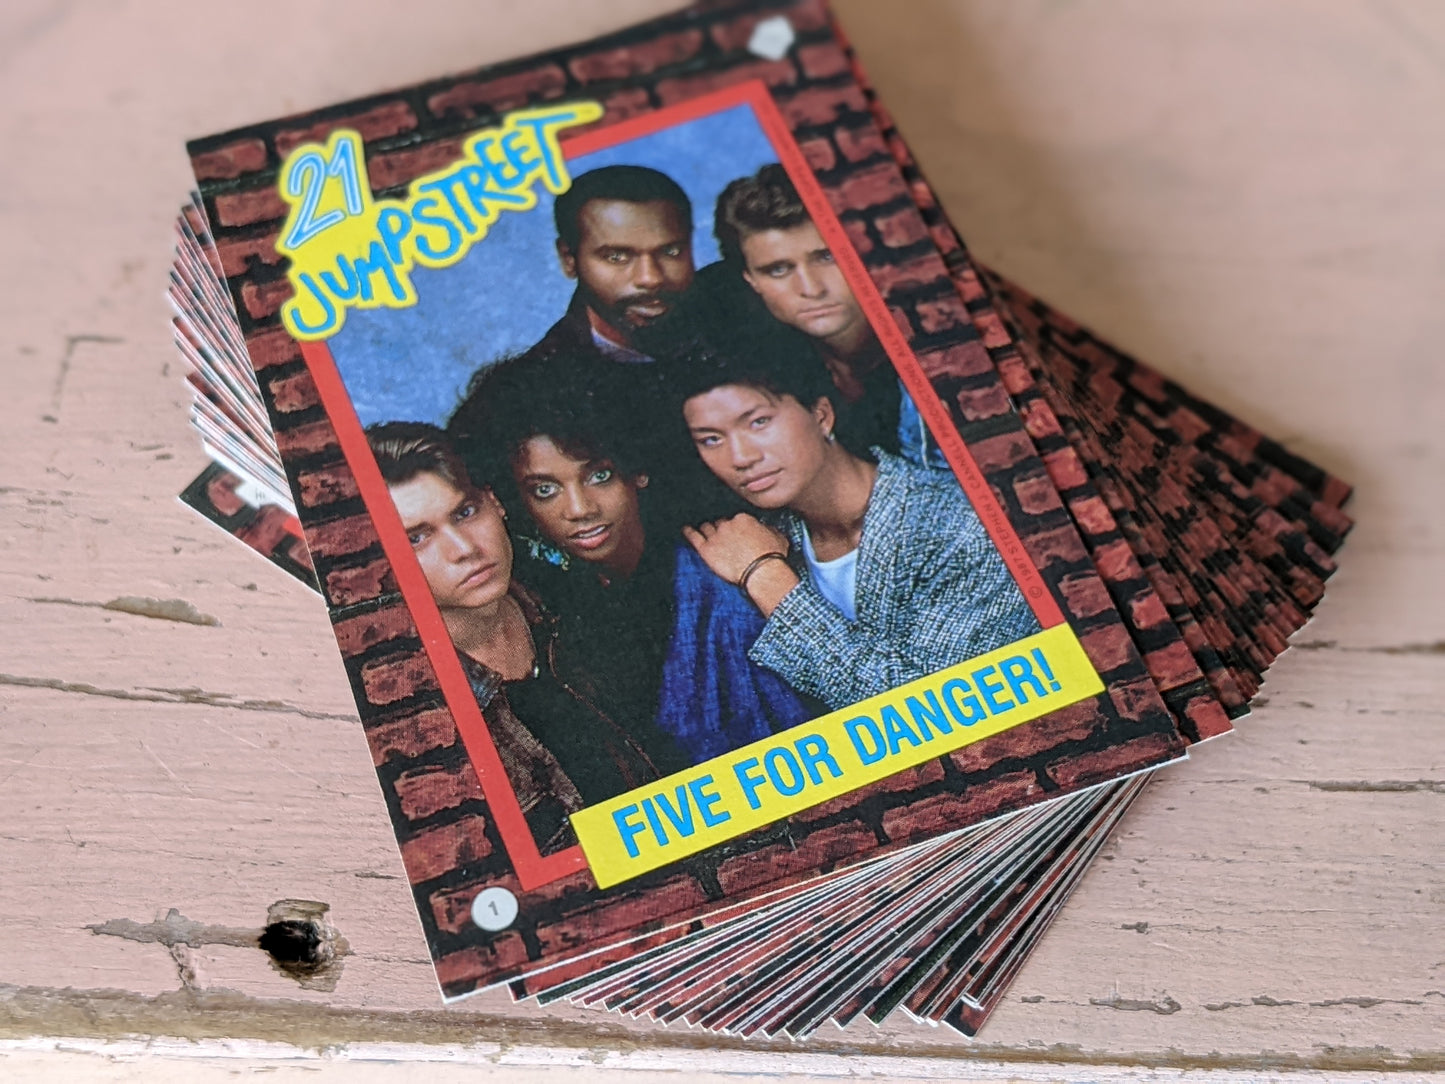 1987 21 Jumpstreet **Complete 44 Sticker Card Set by Topps